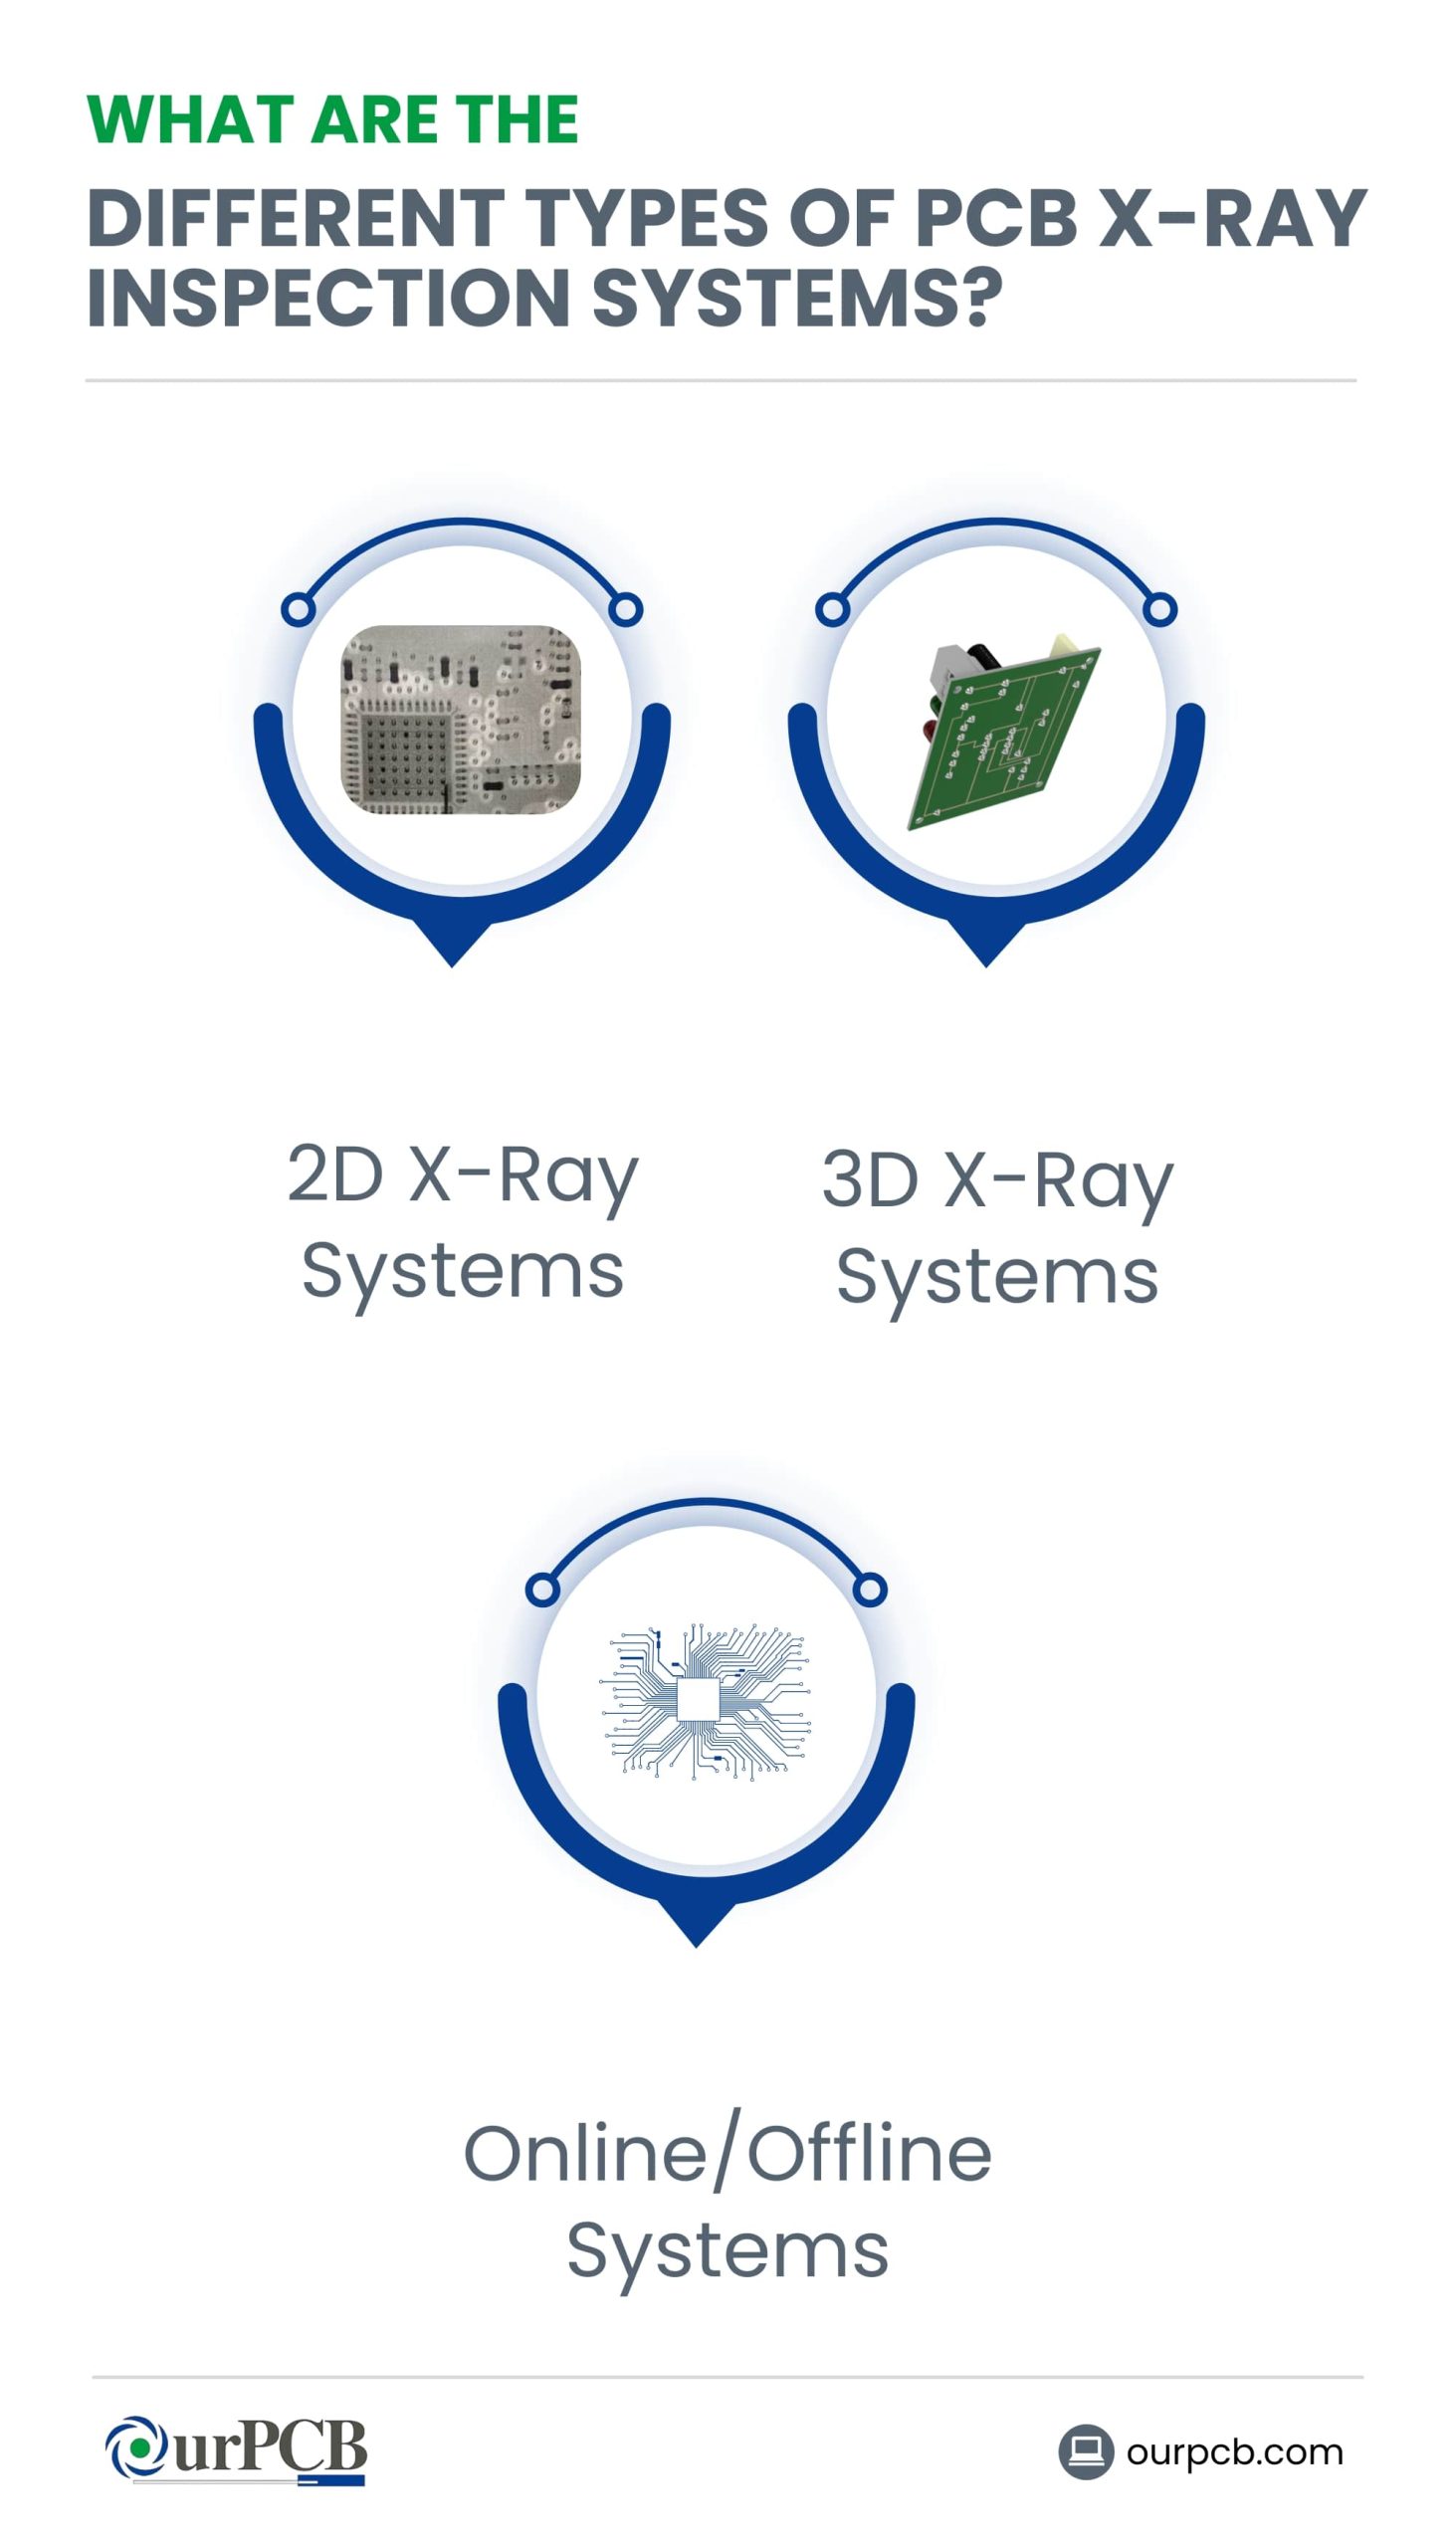 Different types of PCB X-ray Inspection Systems